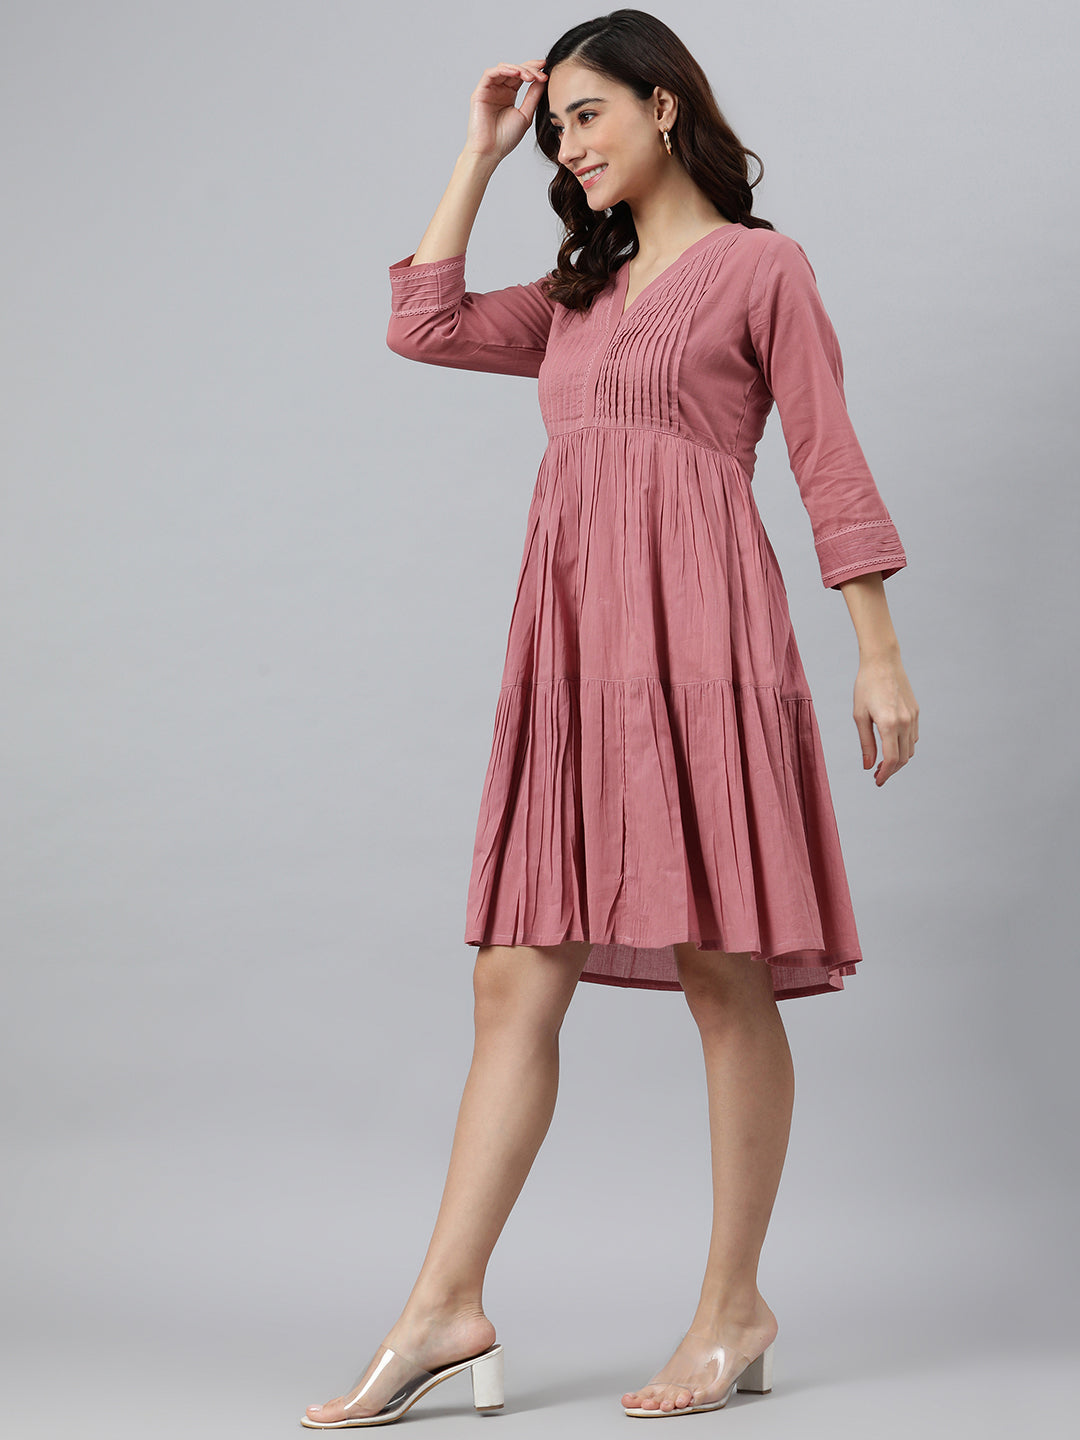 Coral Pink Cotton Western Dress